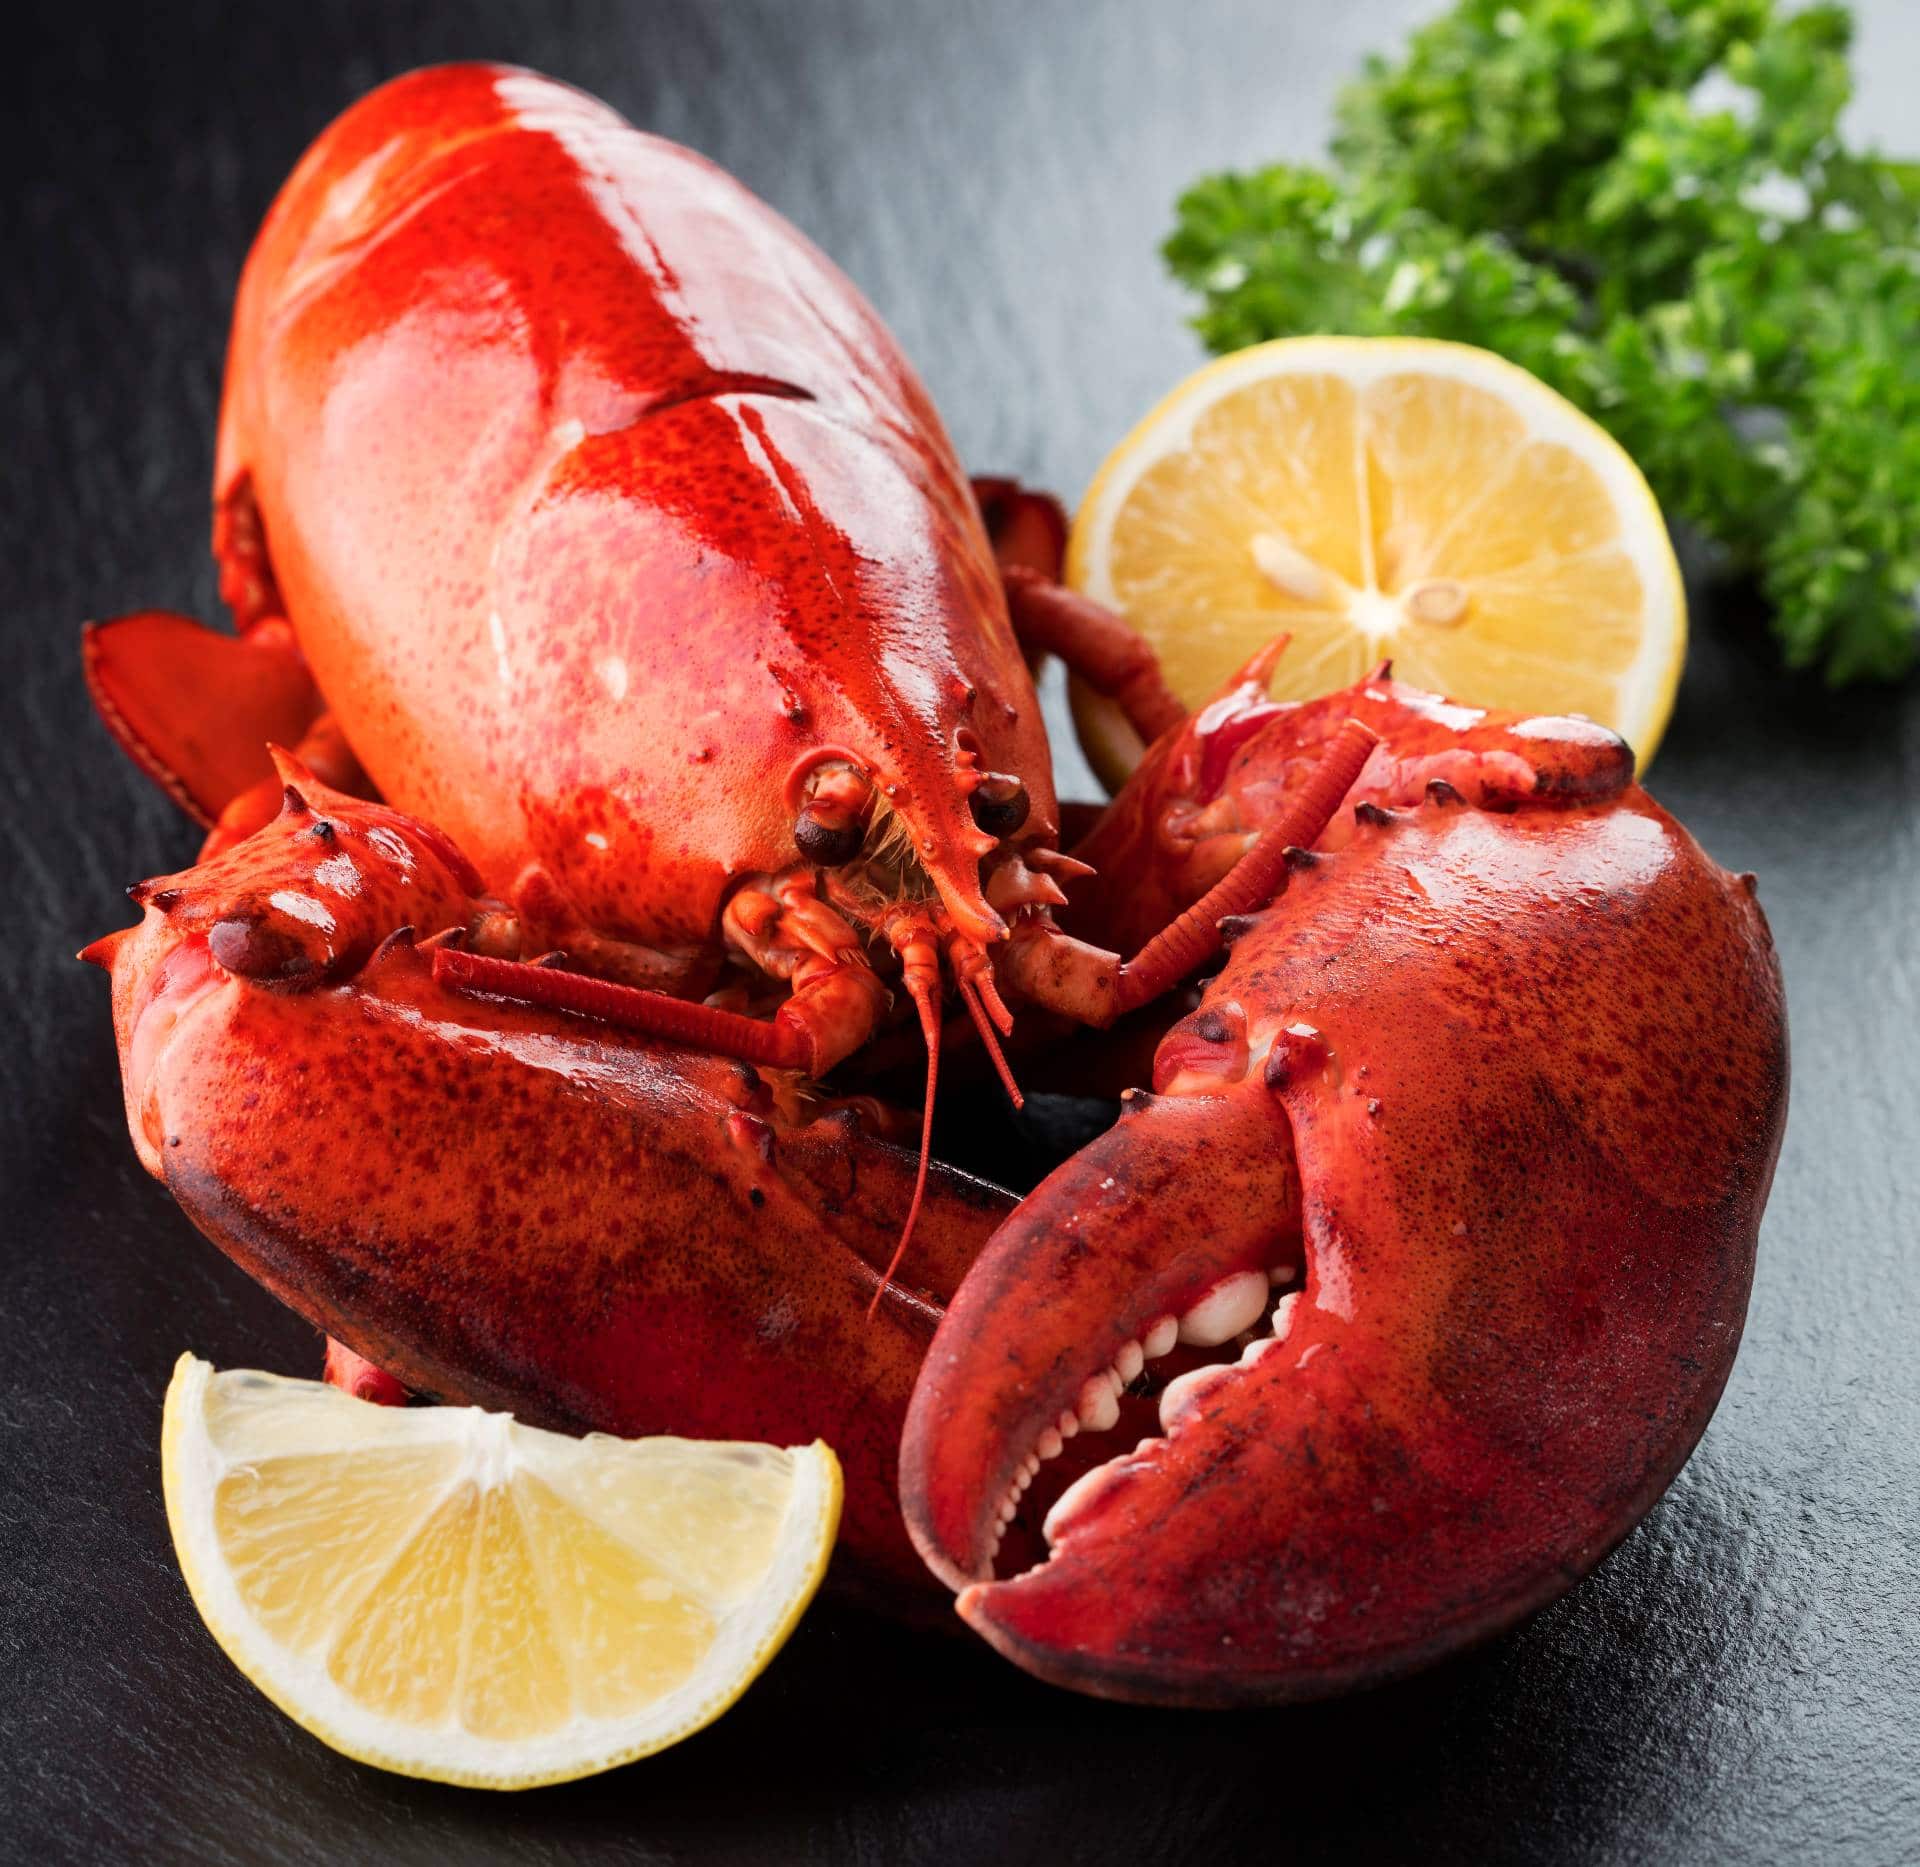 Difference between lobster and lobster - Seafood differences